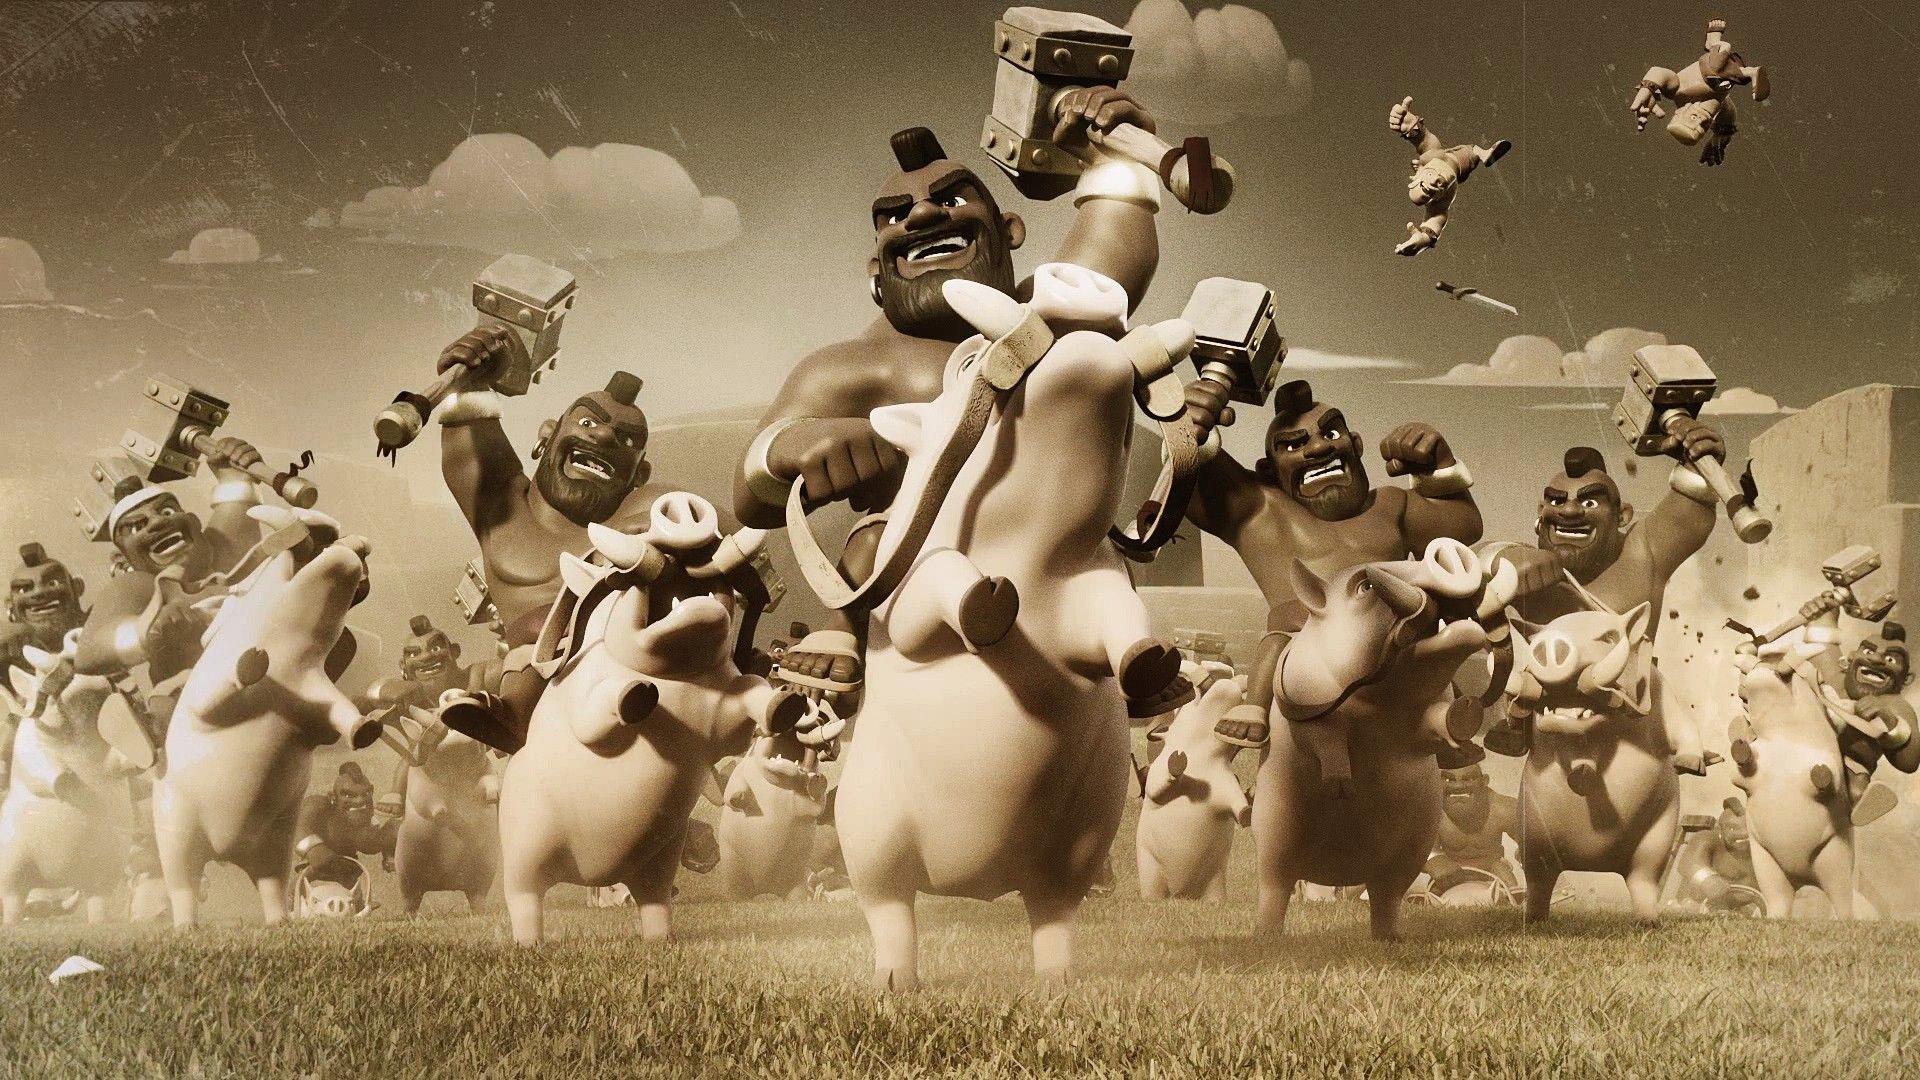 Clash of Clans Ride of The Hog Riders Wallpapers 00662.